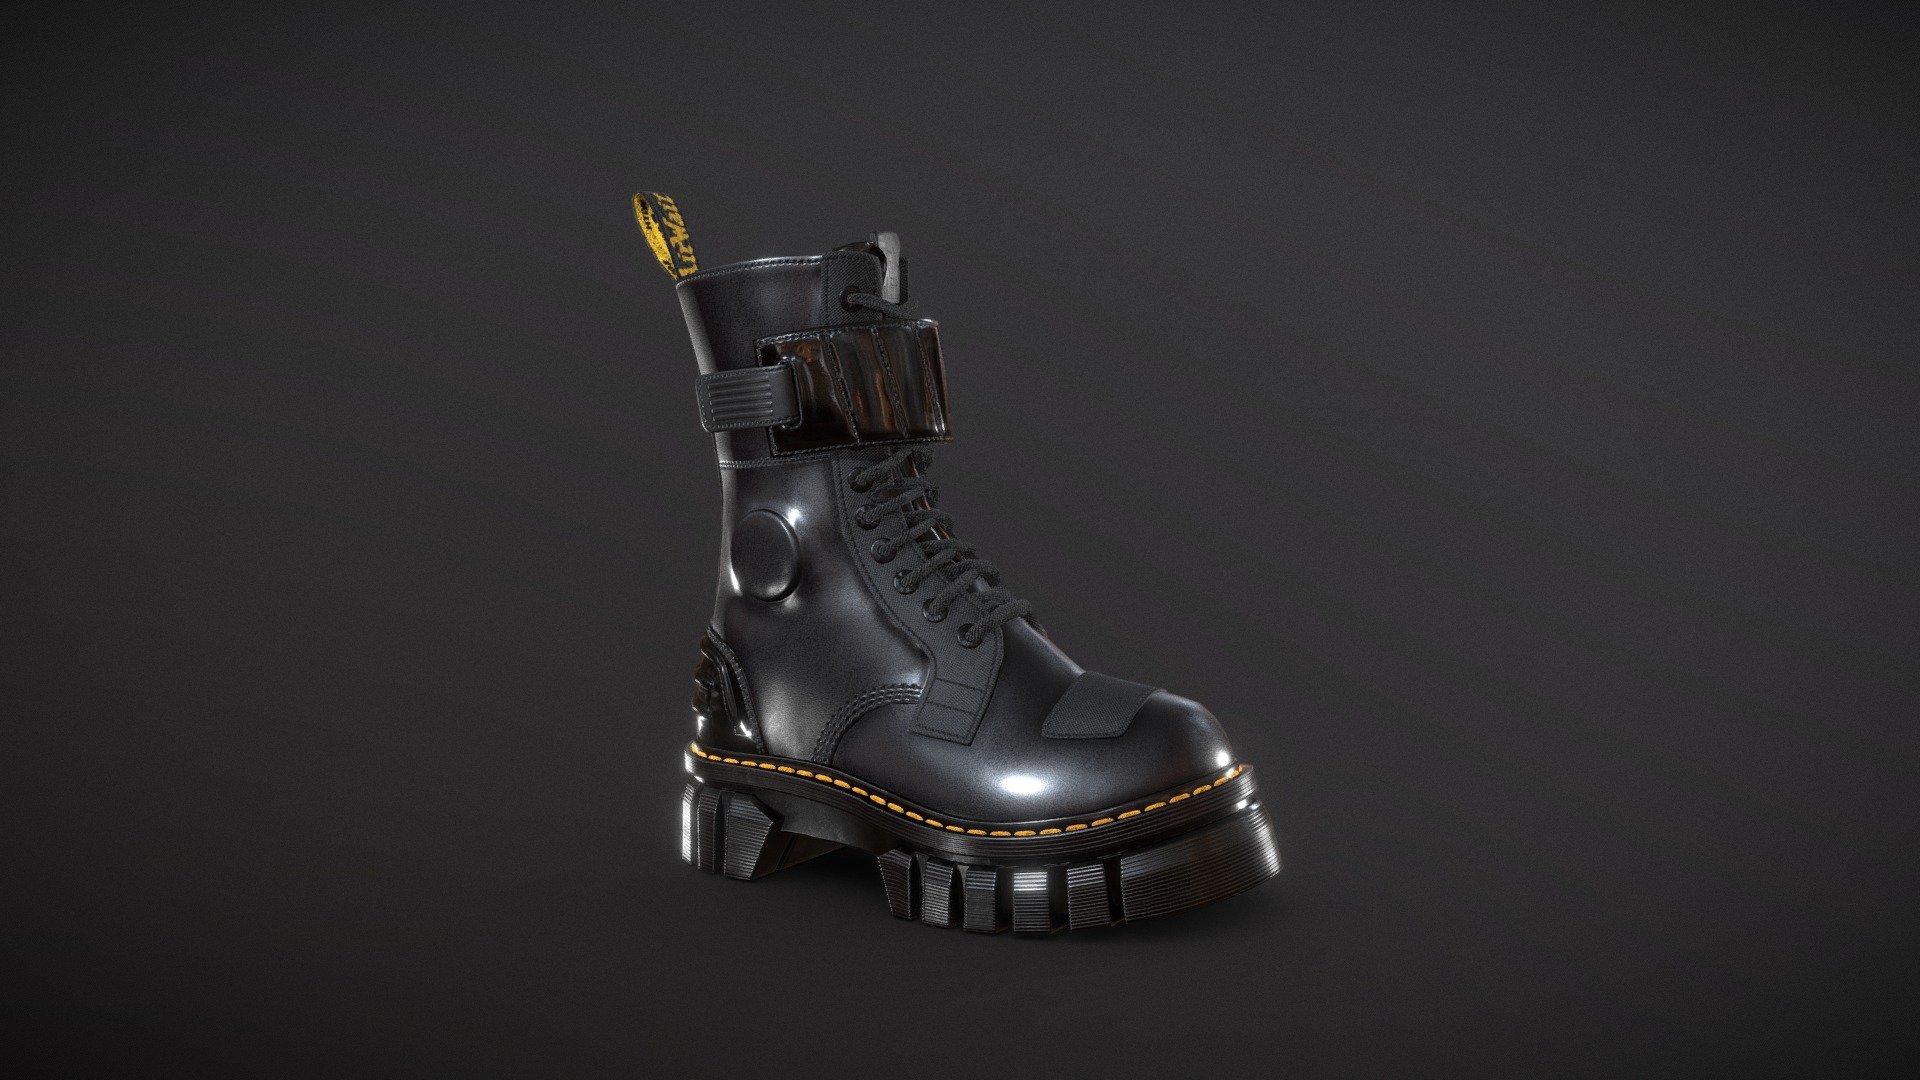 Dr. Martens Audrick Alternative

Game and production ready, polycount optimized for quality, ideal for high quality Characters and Close-Ups

Internal parts modeled and textured, ideal for customization or animation

Laces are continuous, no cuts behind the eyelets

Single UV space

PBR and UE4 4k Textures

Low Poly has 9.3k quads

FBX, OBJ, ZTL - Dr. Martens Audrick Alternative - Buy Royalty Free 3D model by Feds452 3d model